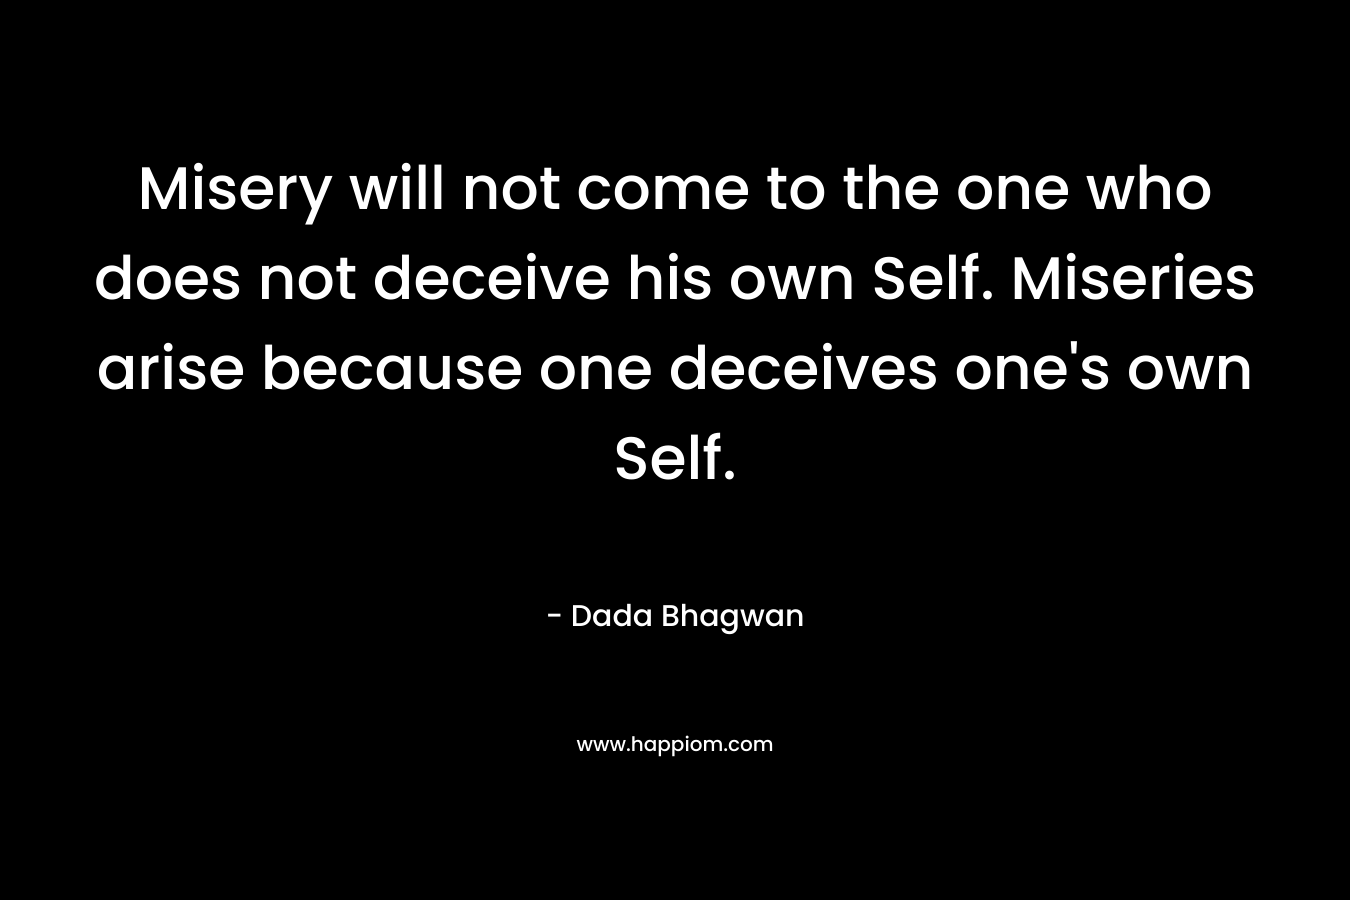 Misery will not come to the one who does not deceive his own Self. Miseries arise because one deceives one's own Self.